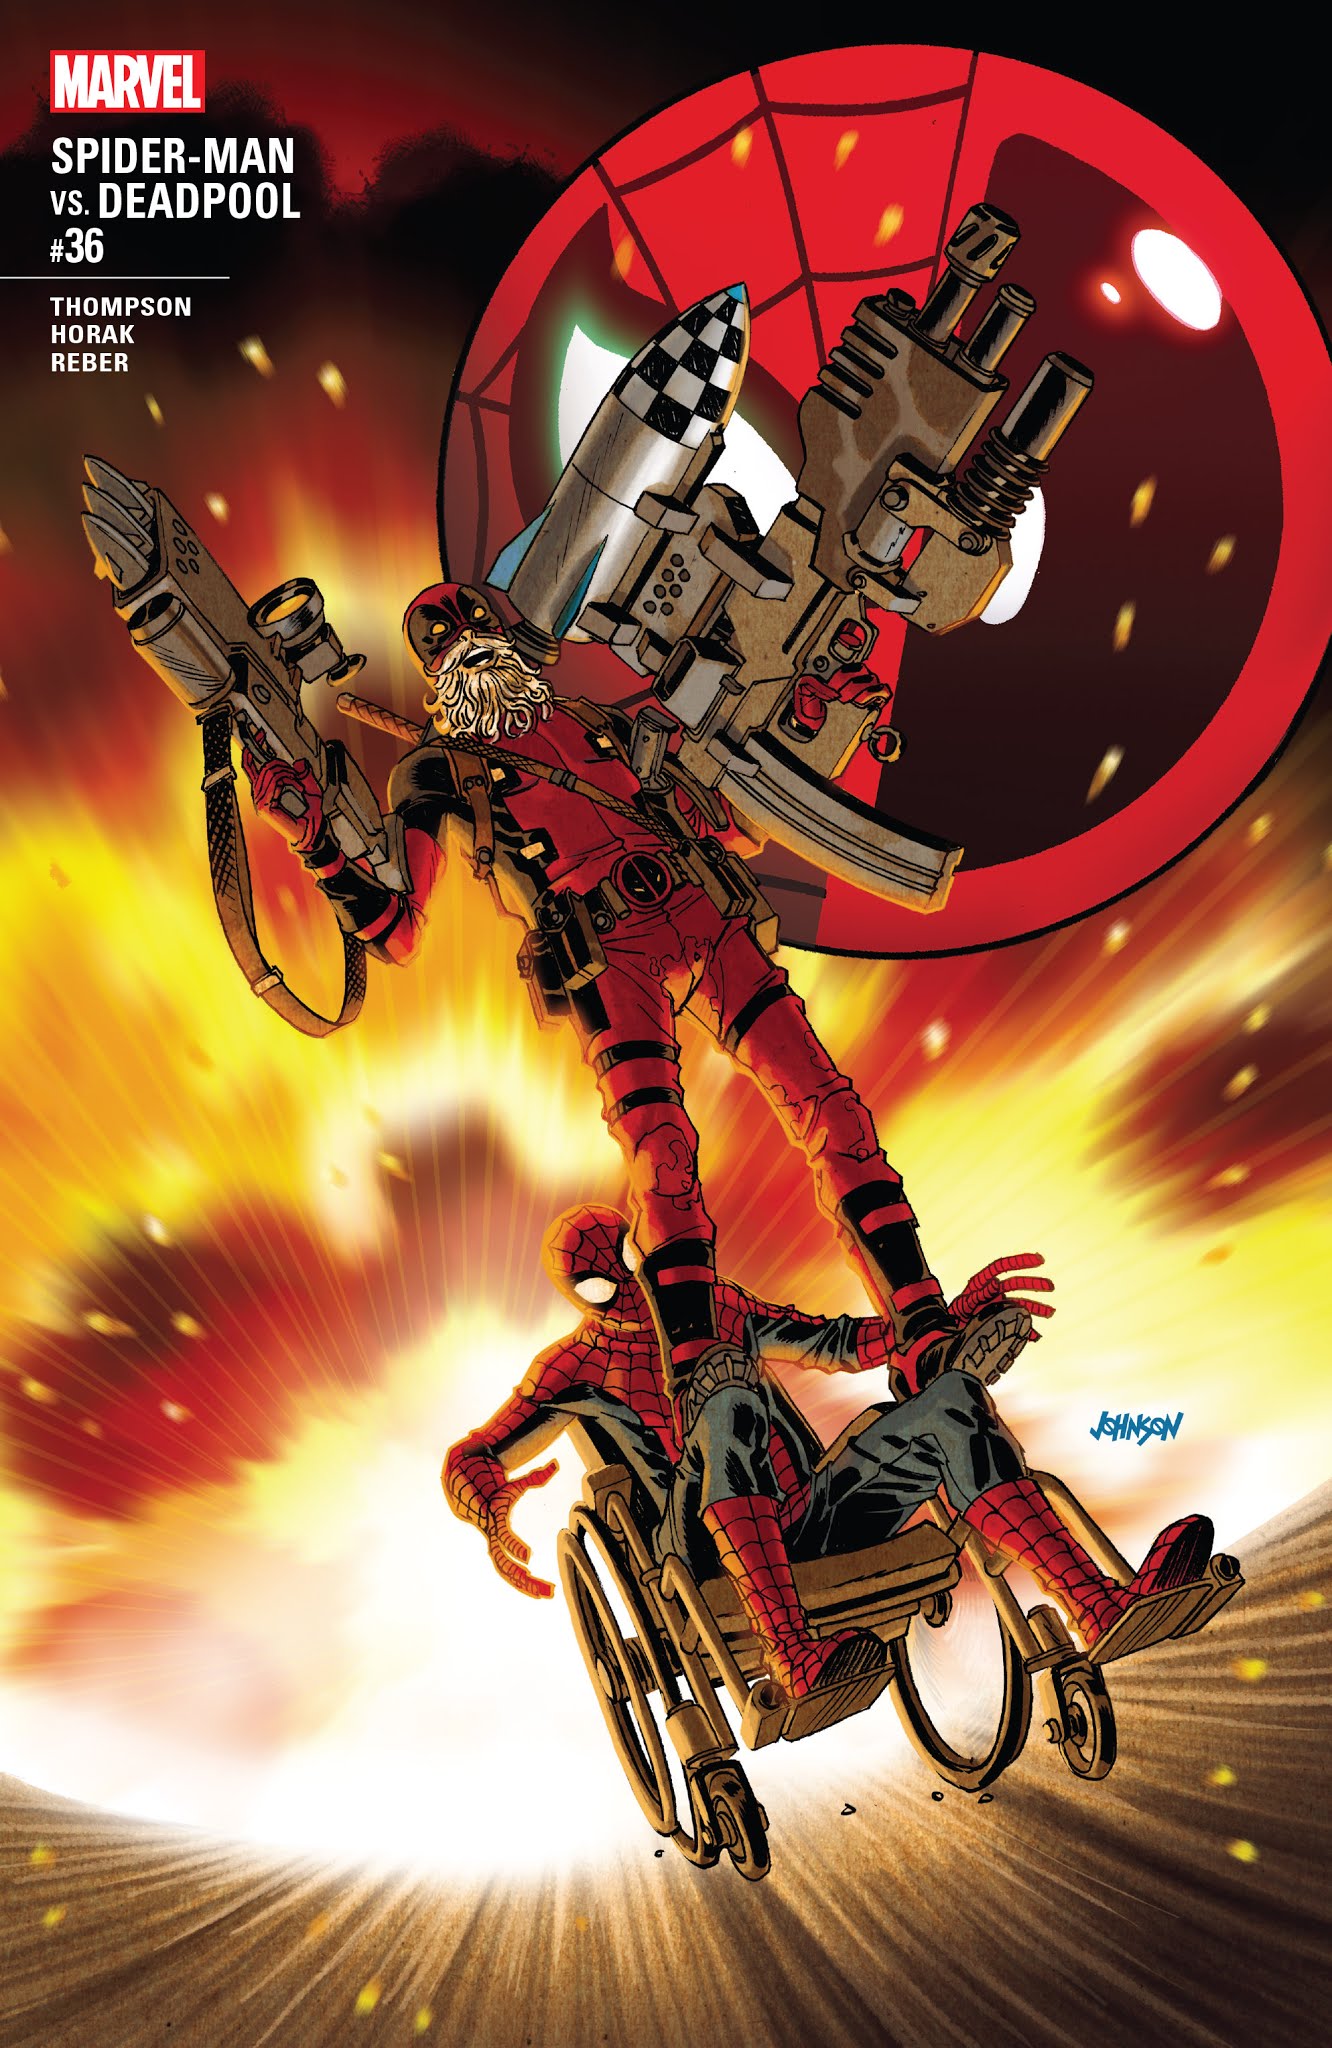 Spider Man Deadpool Issue 36 | Read Spider Man Deadpool Issue 36 comic  online in high quality. Read Full Comic online for free - Read comics online  in high quality .| READ COMIC ONLINE